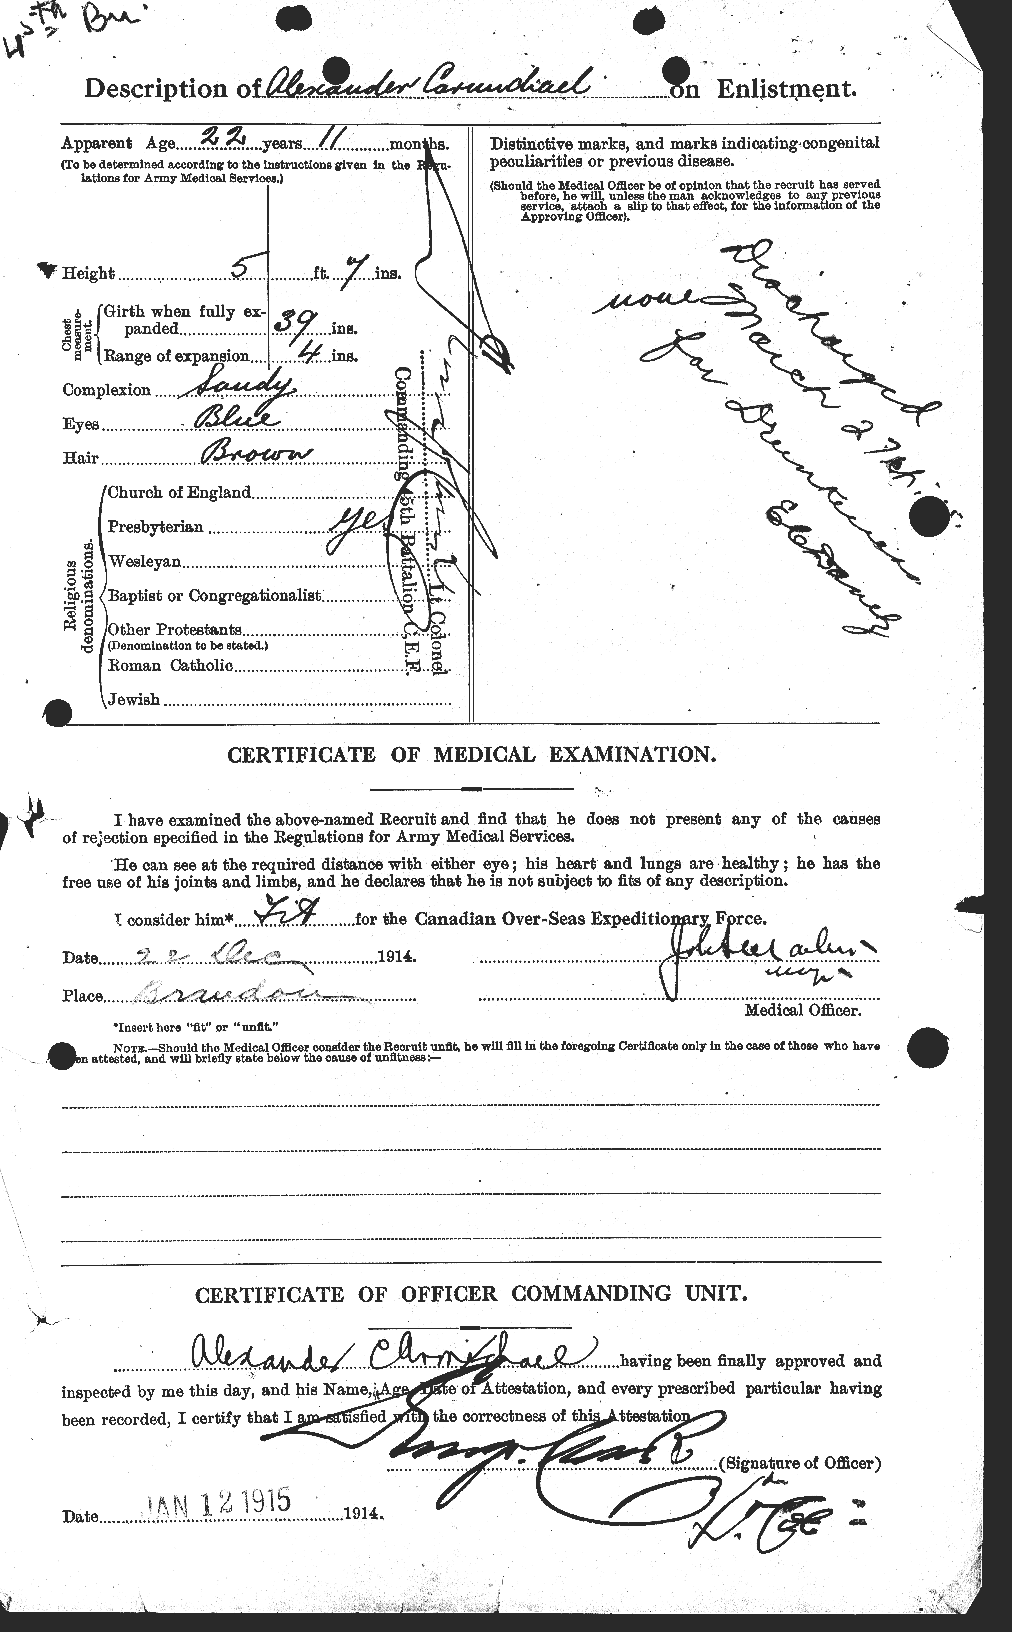 Personnel Records of the First World War - CEF 009823b